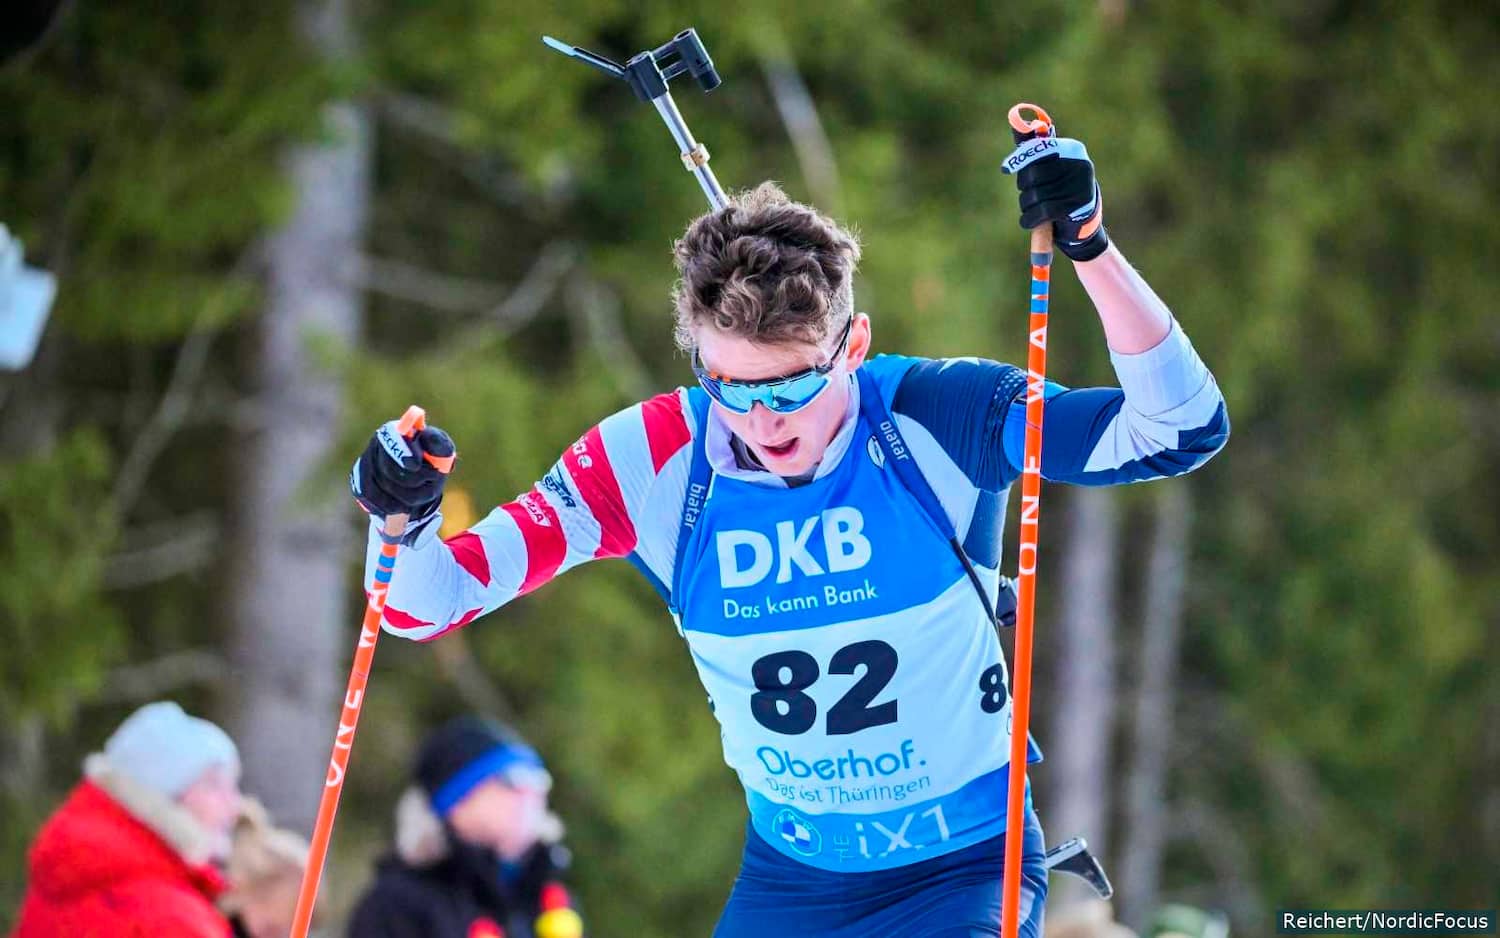 Maxime Germain competes in the 2023 IBU World Championships in Oberhof, Germany.